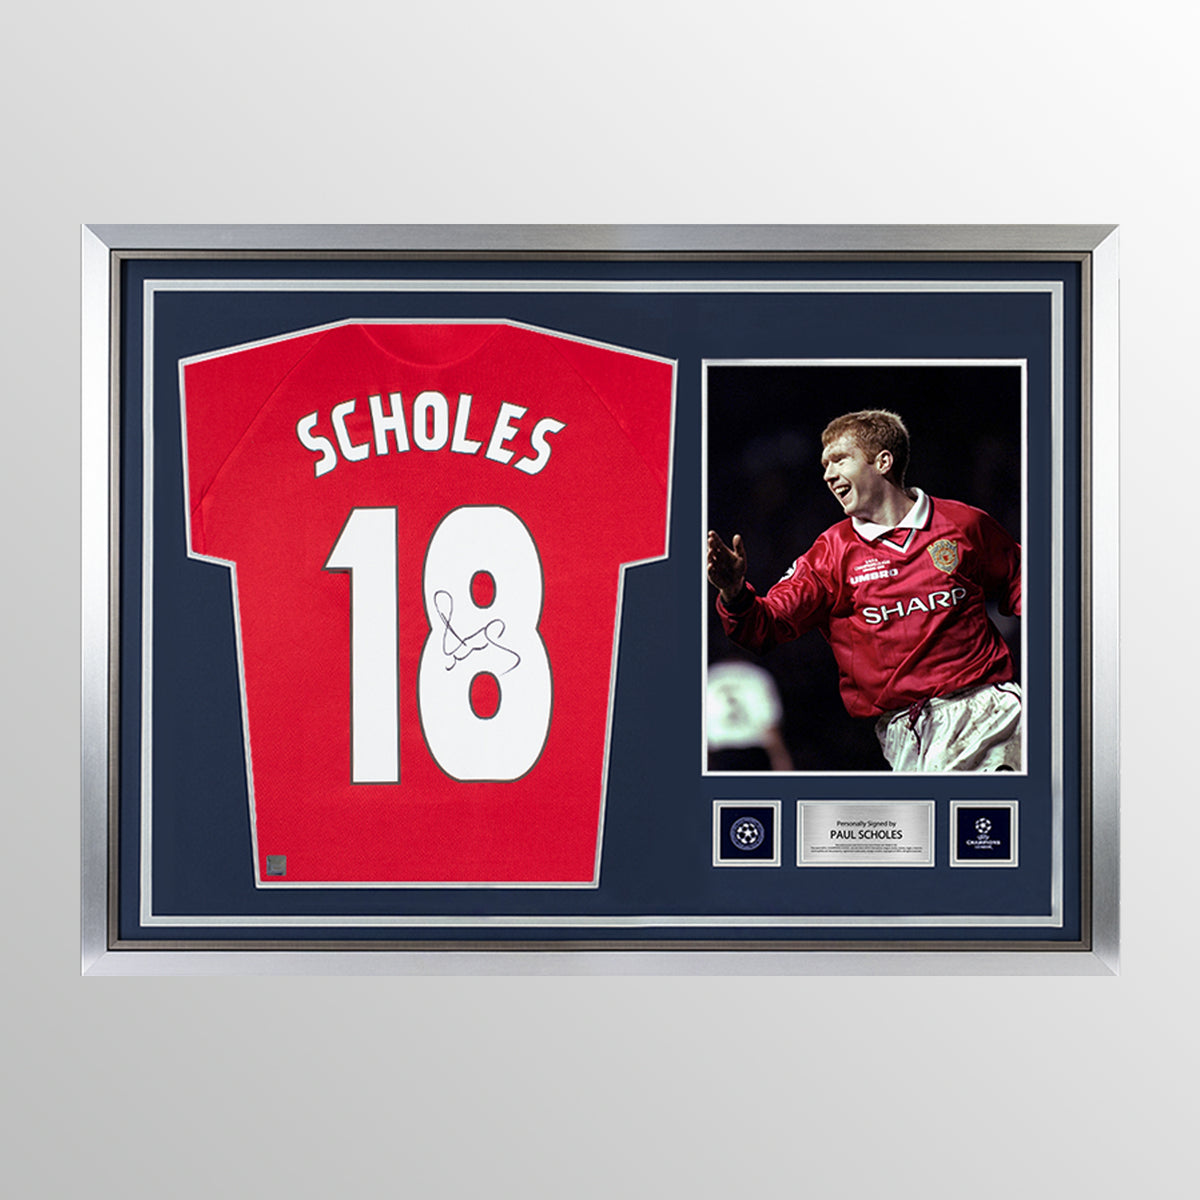 Paul Scholes Official UEFA Champions League Back Signed and Hero Framed 1999 Manchester United Home Shirt: UCL Edition UEFA Club Competitions Online Store